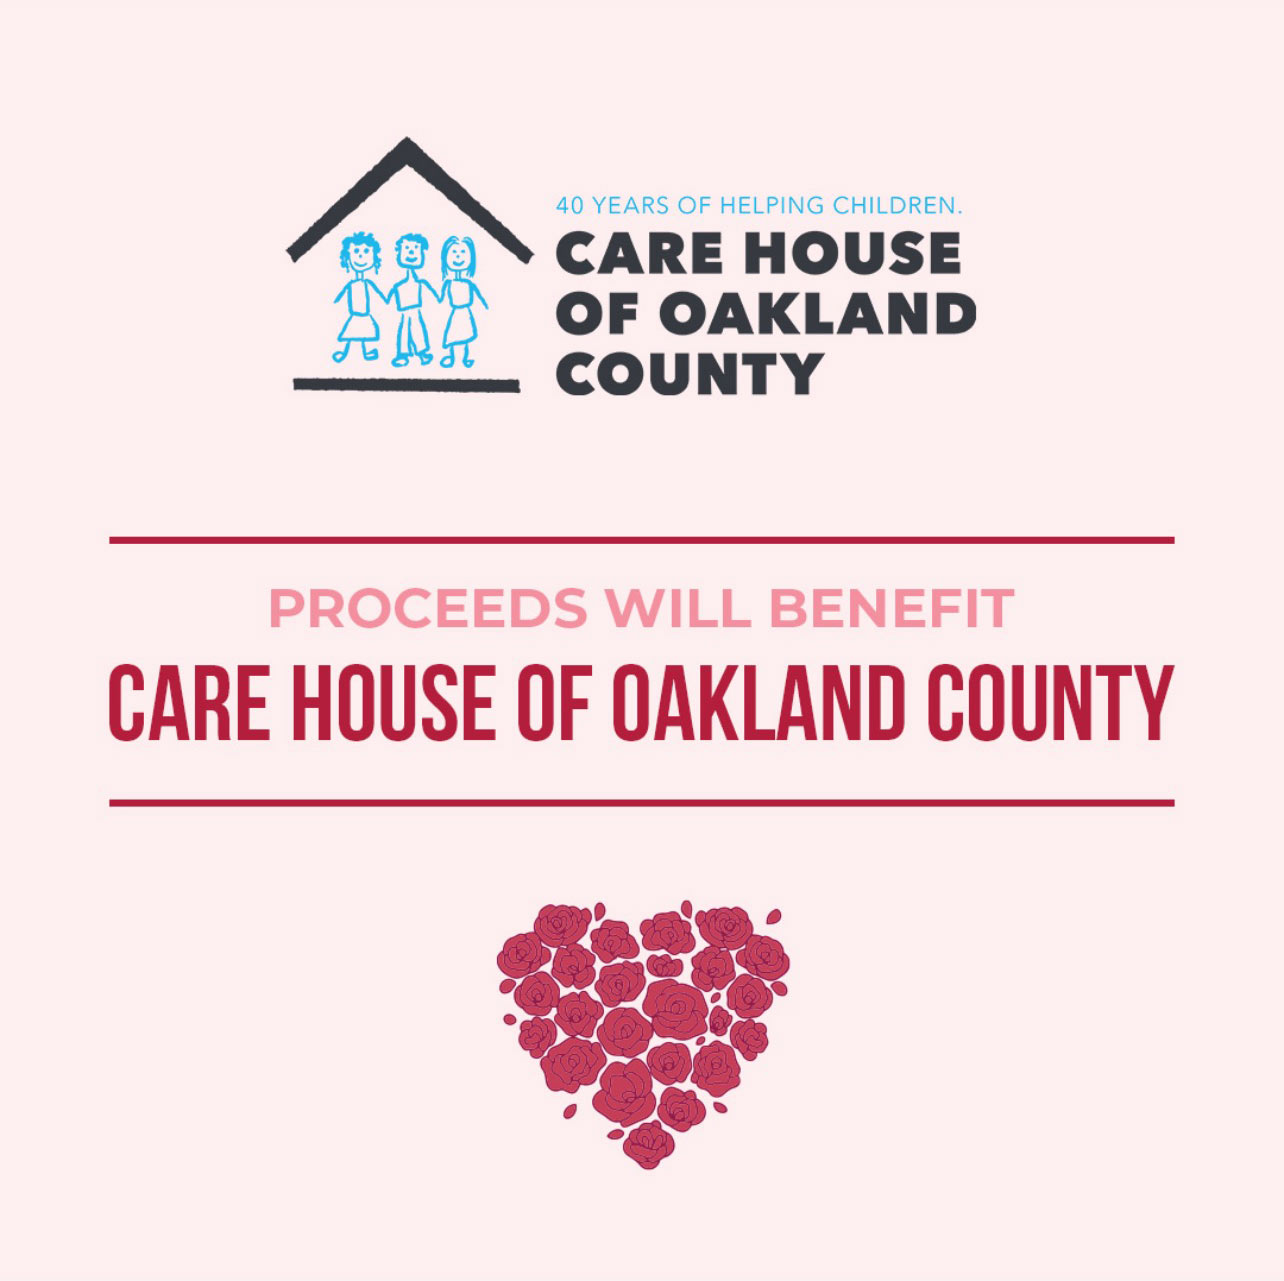 Proceeds will benefit Care House of Oakland County